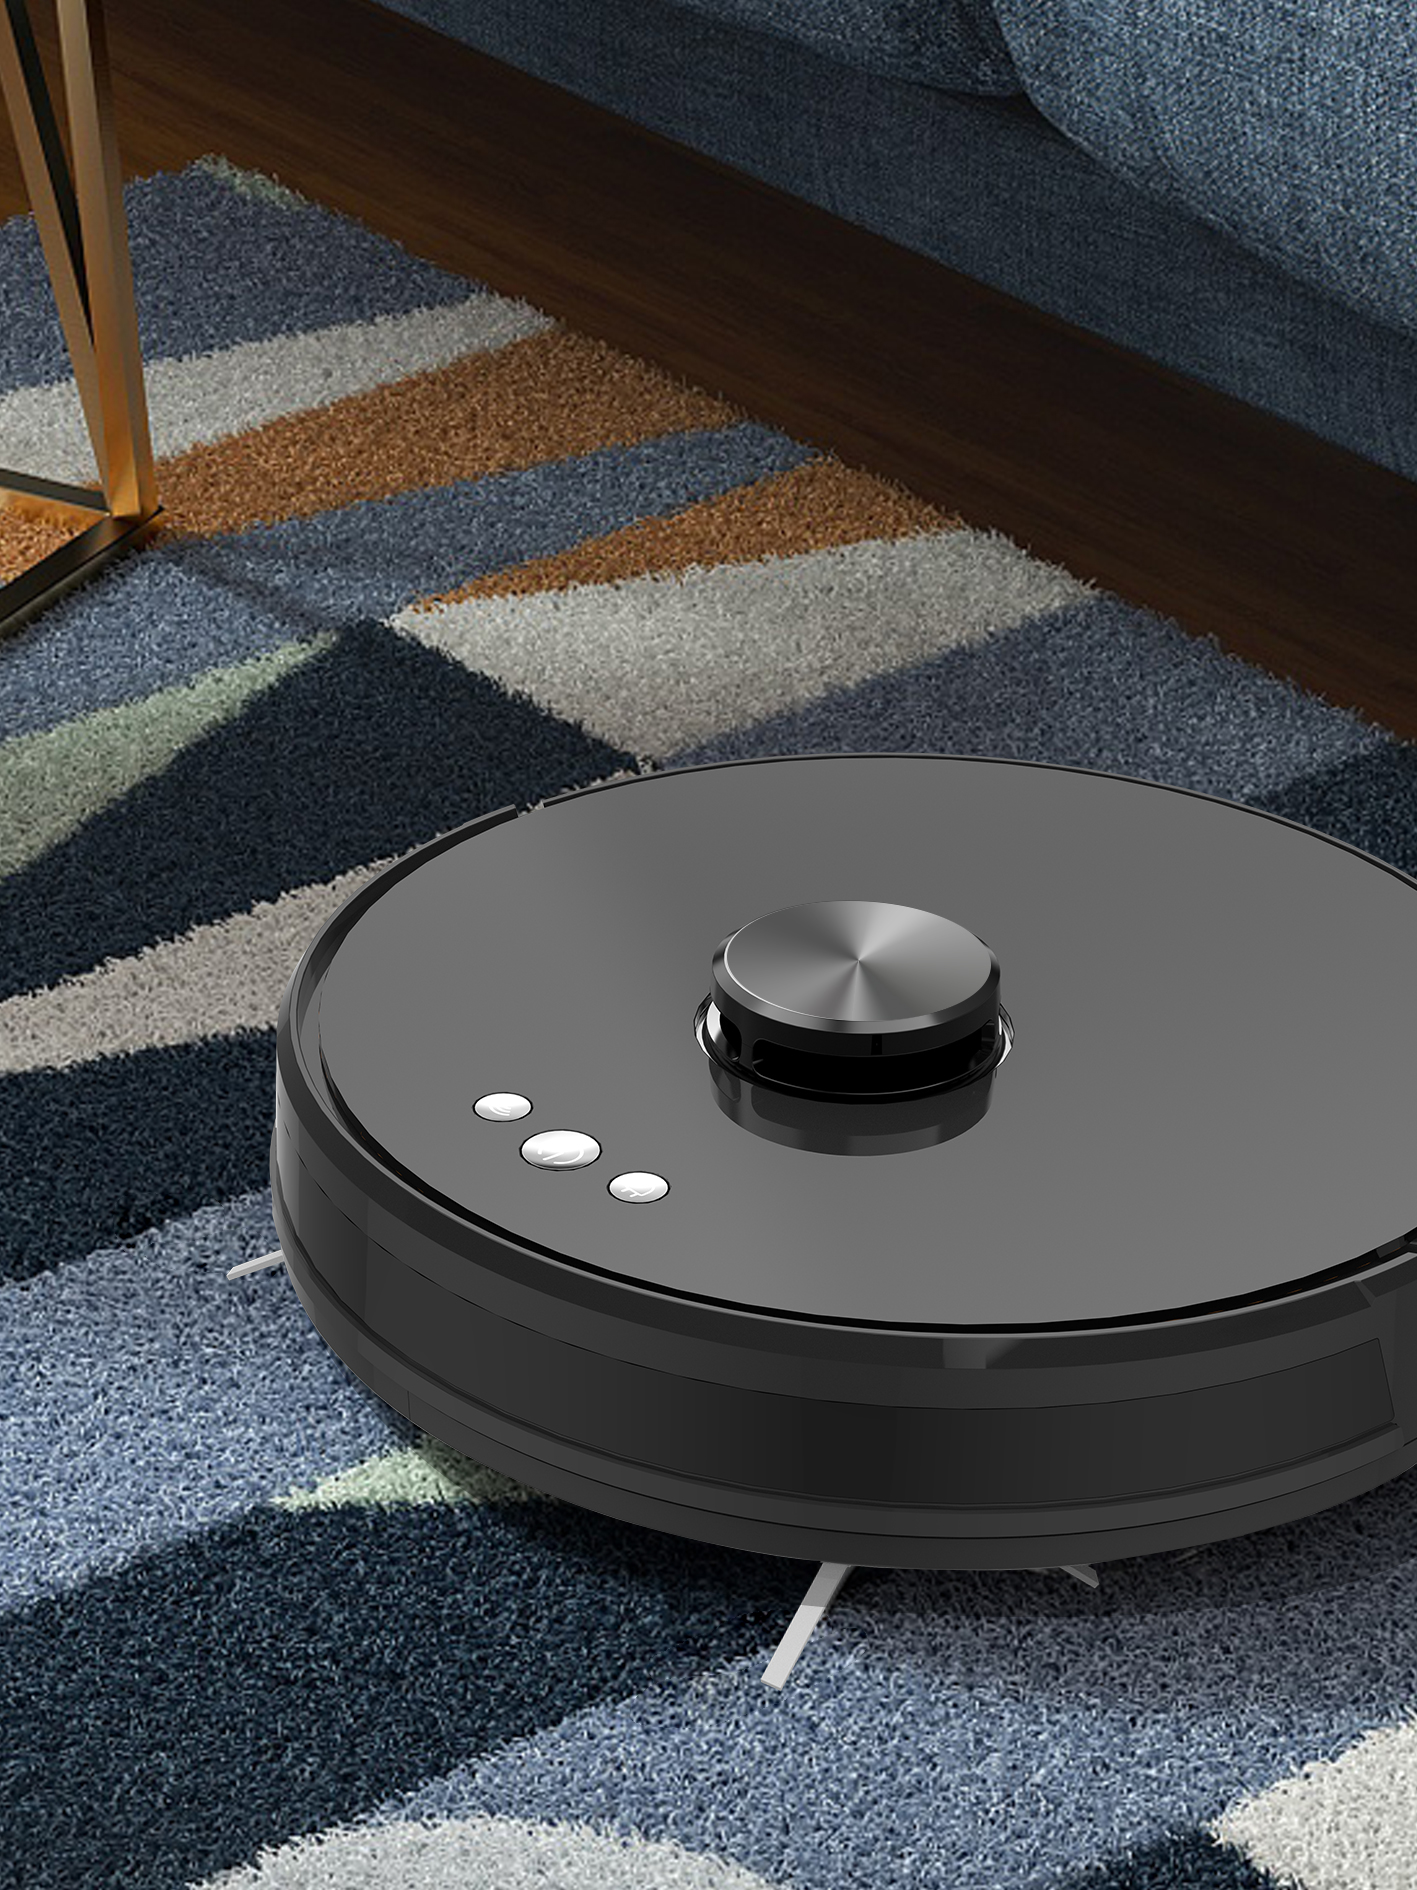 Robot Vacuum For Carpet And Hardwood with Integrated Sensors